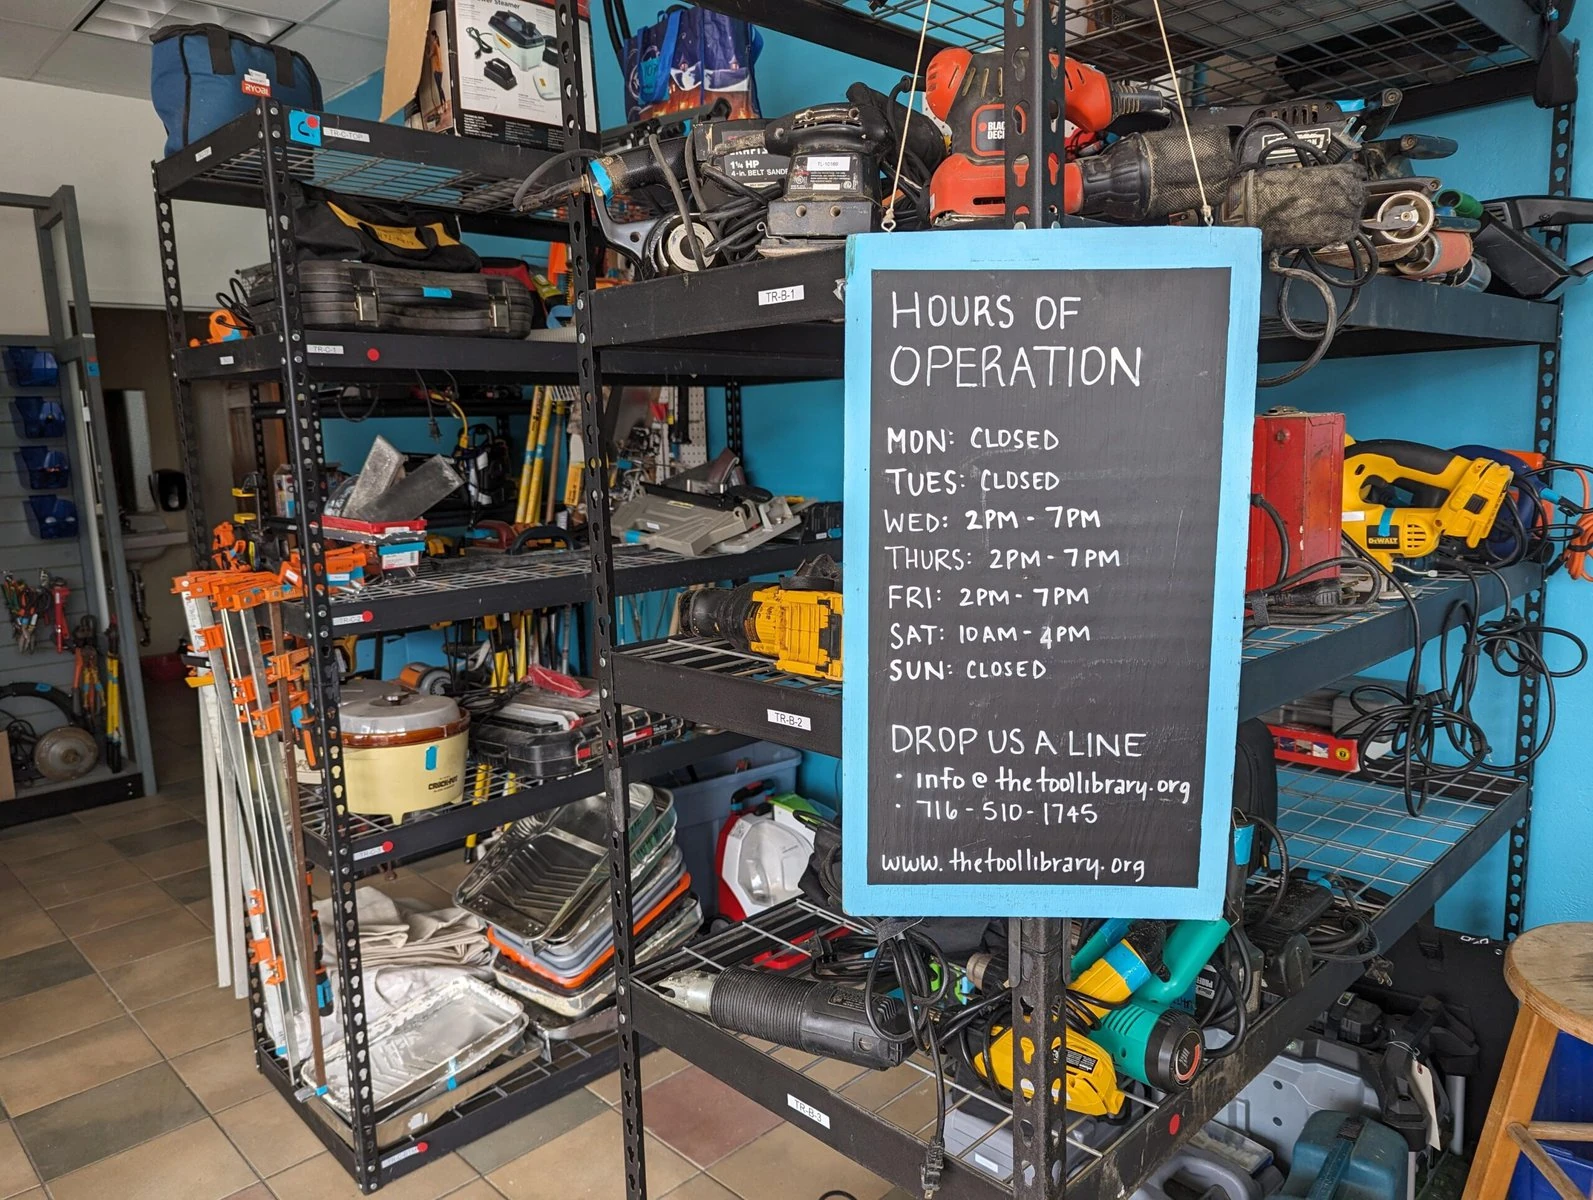 Tools on display at The Tool Library with a chalkboard showing hours of operation.